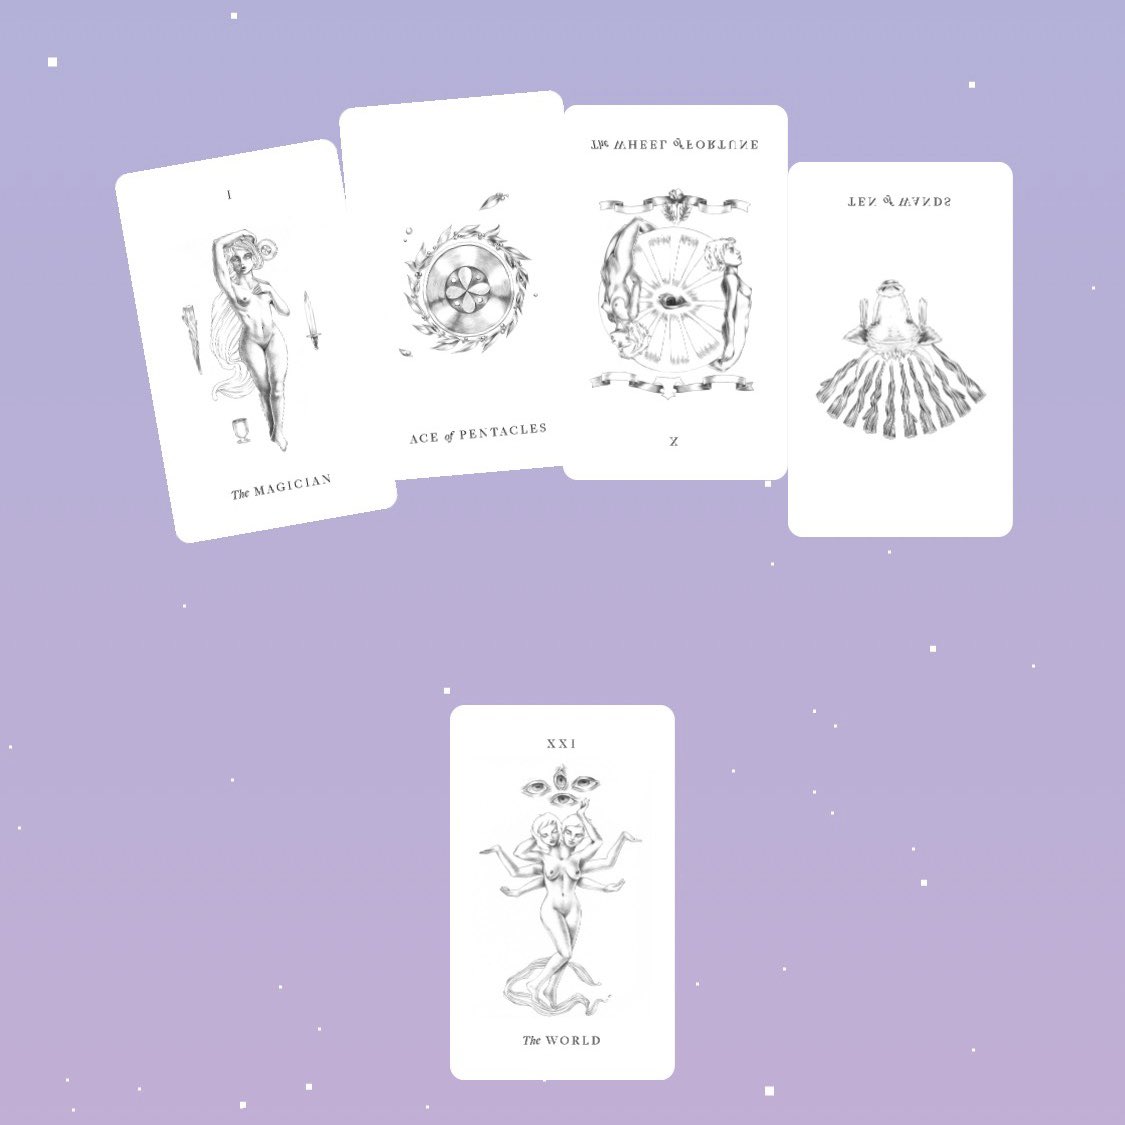 Just did my #fullmoon reading with my #luminousspirittarot deck from @gttarot. This was spot on! My intention for this cycle was to cultivate self-love. 🌕